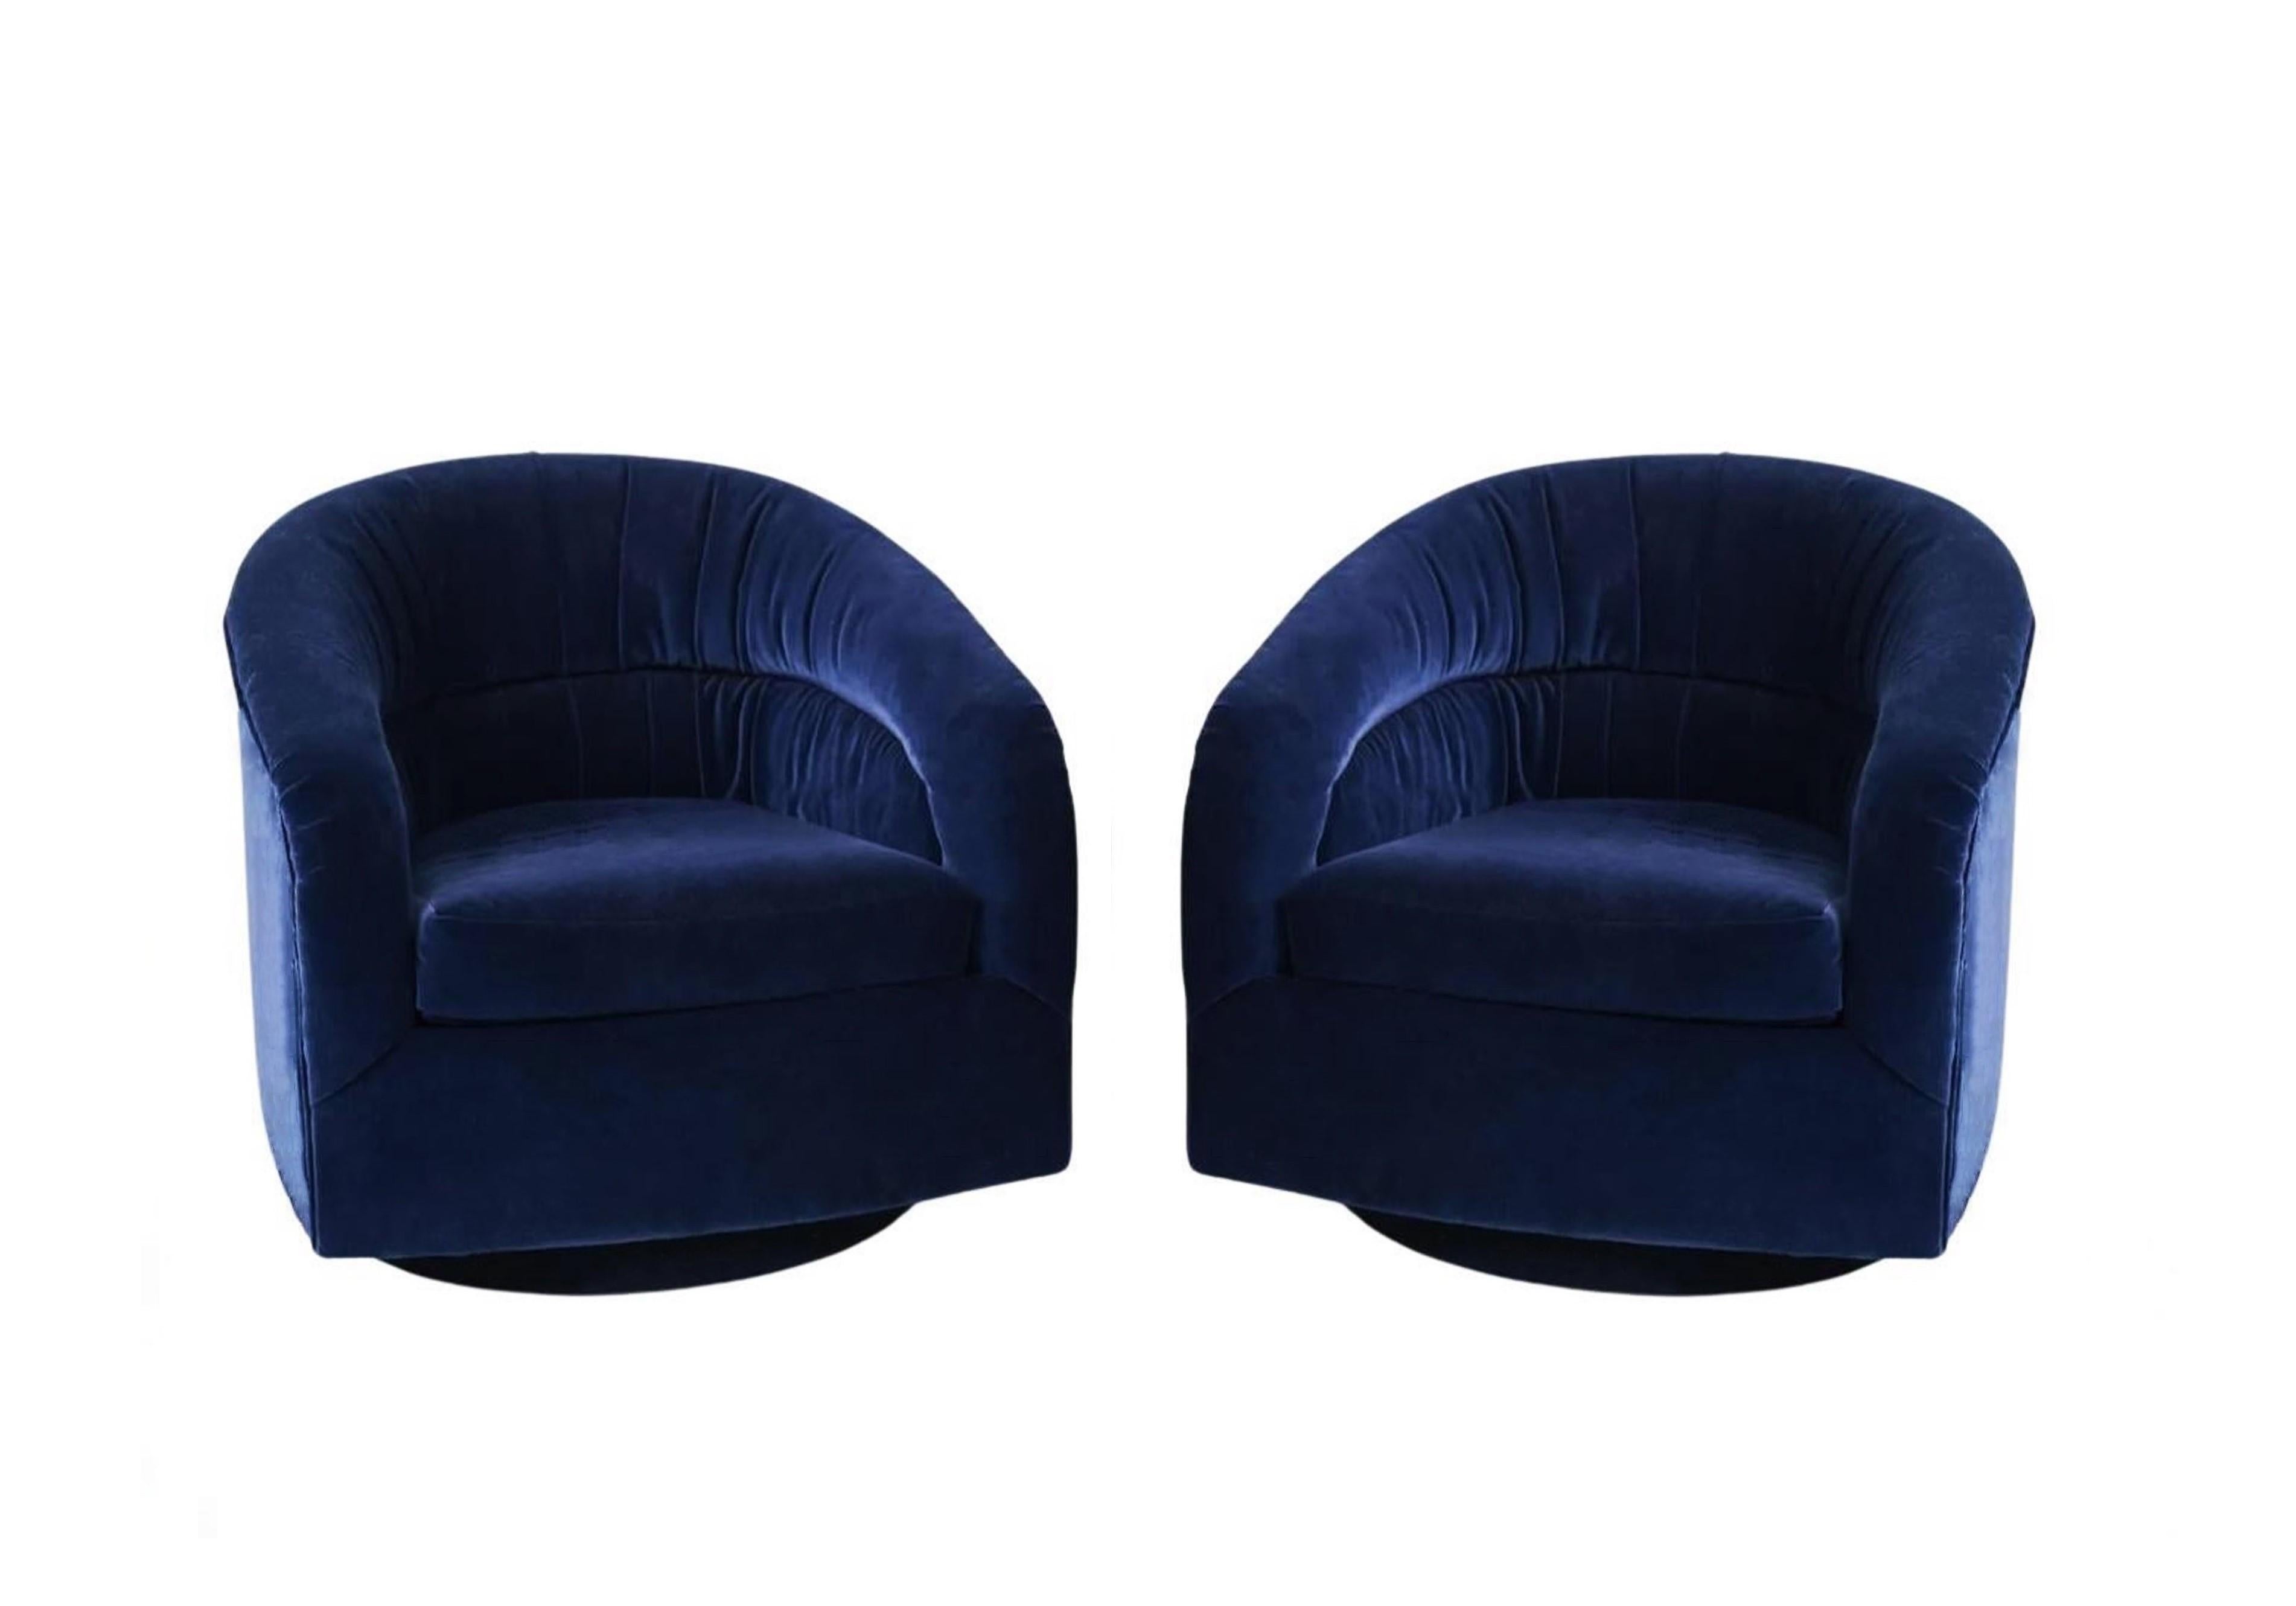 These plush chairs are so much more than just typical swivel chairs, draws influence from Milo Baughman, the perfect representation of a classically current design. These accommodating barrel chairs with rounded backs that encapsulates your body to